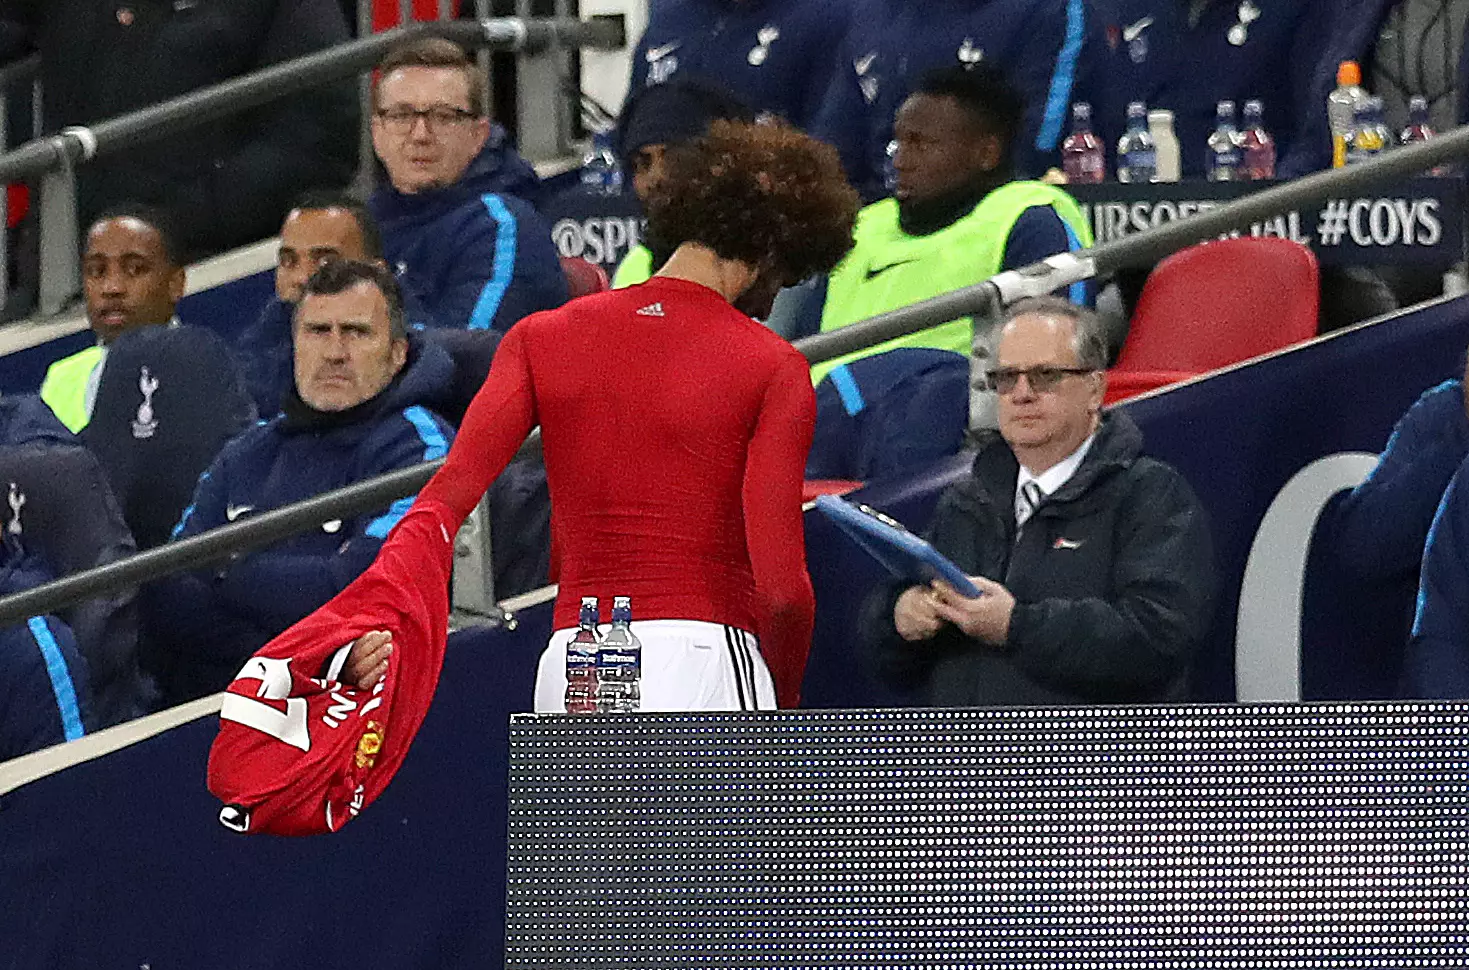 Fellaini wonders down the tunnel after his embarrassing substitution. Image: PA Images